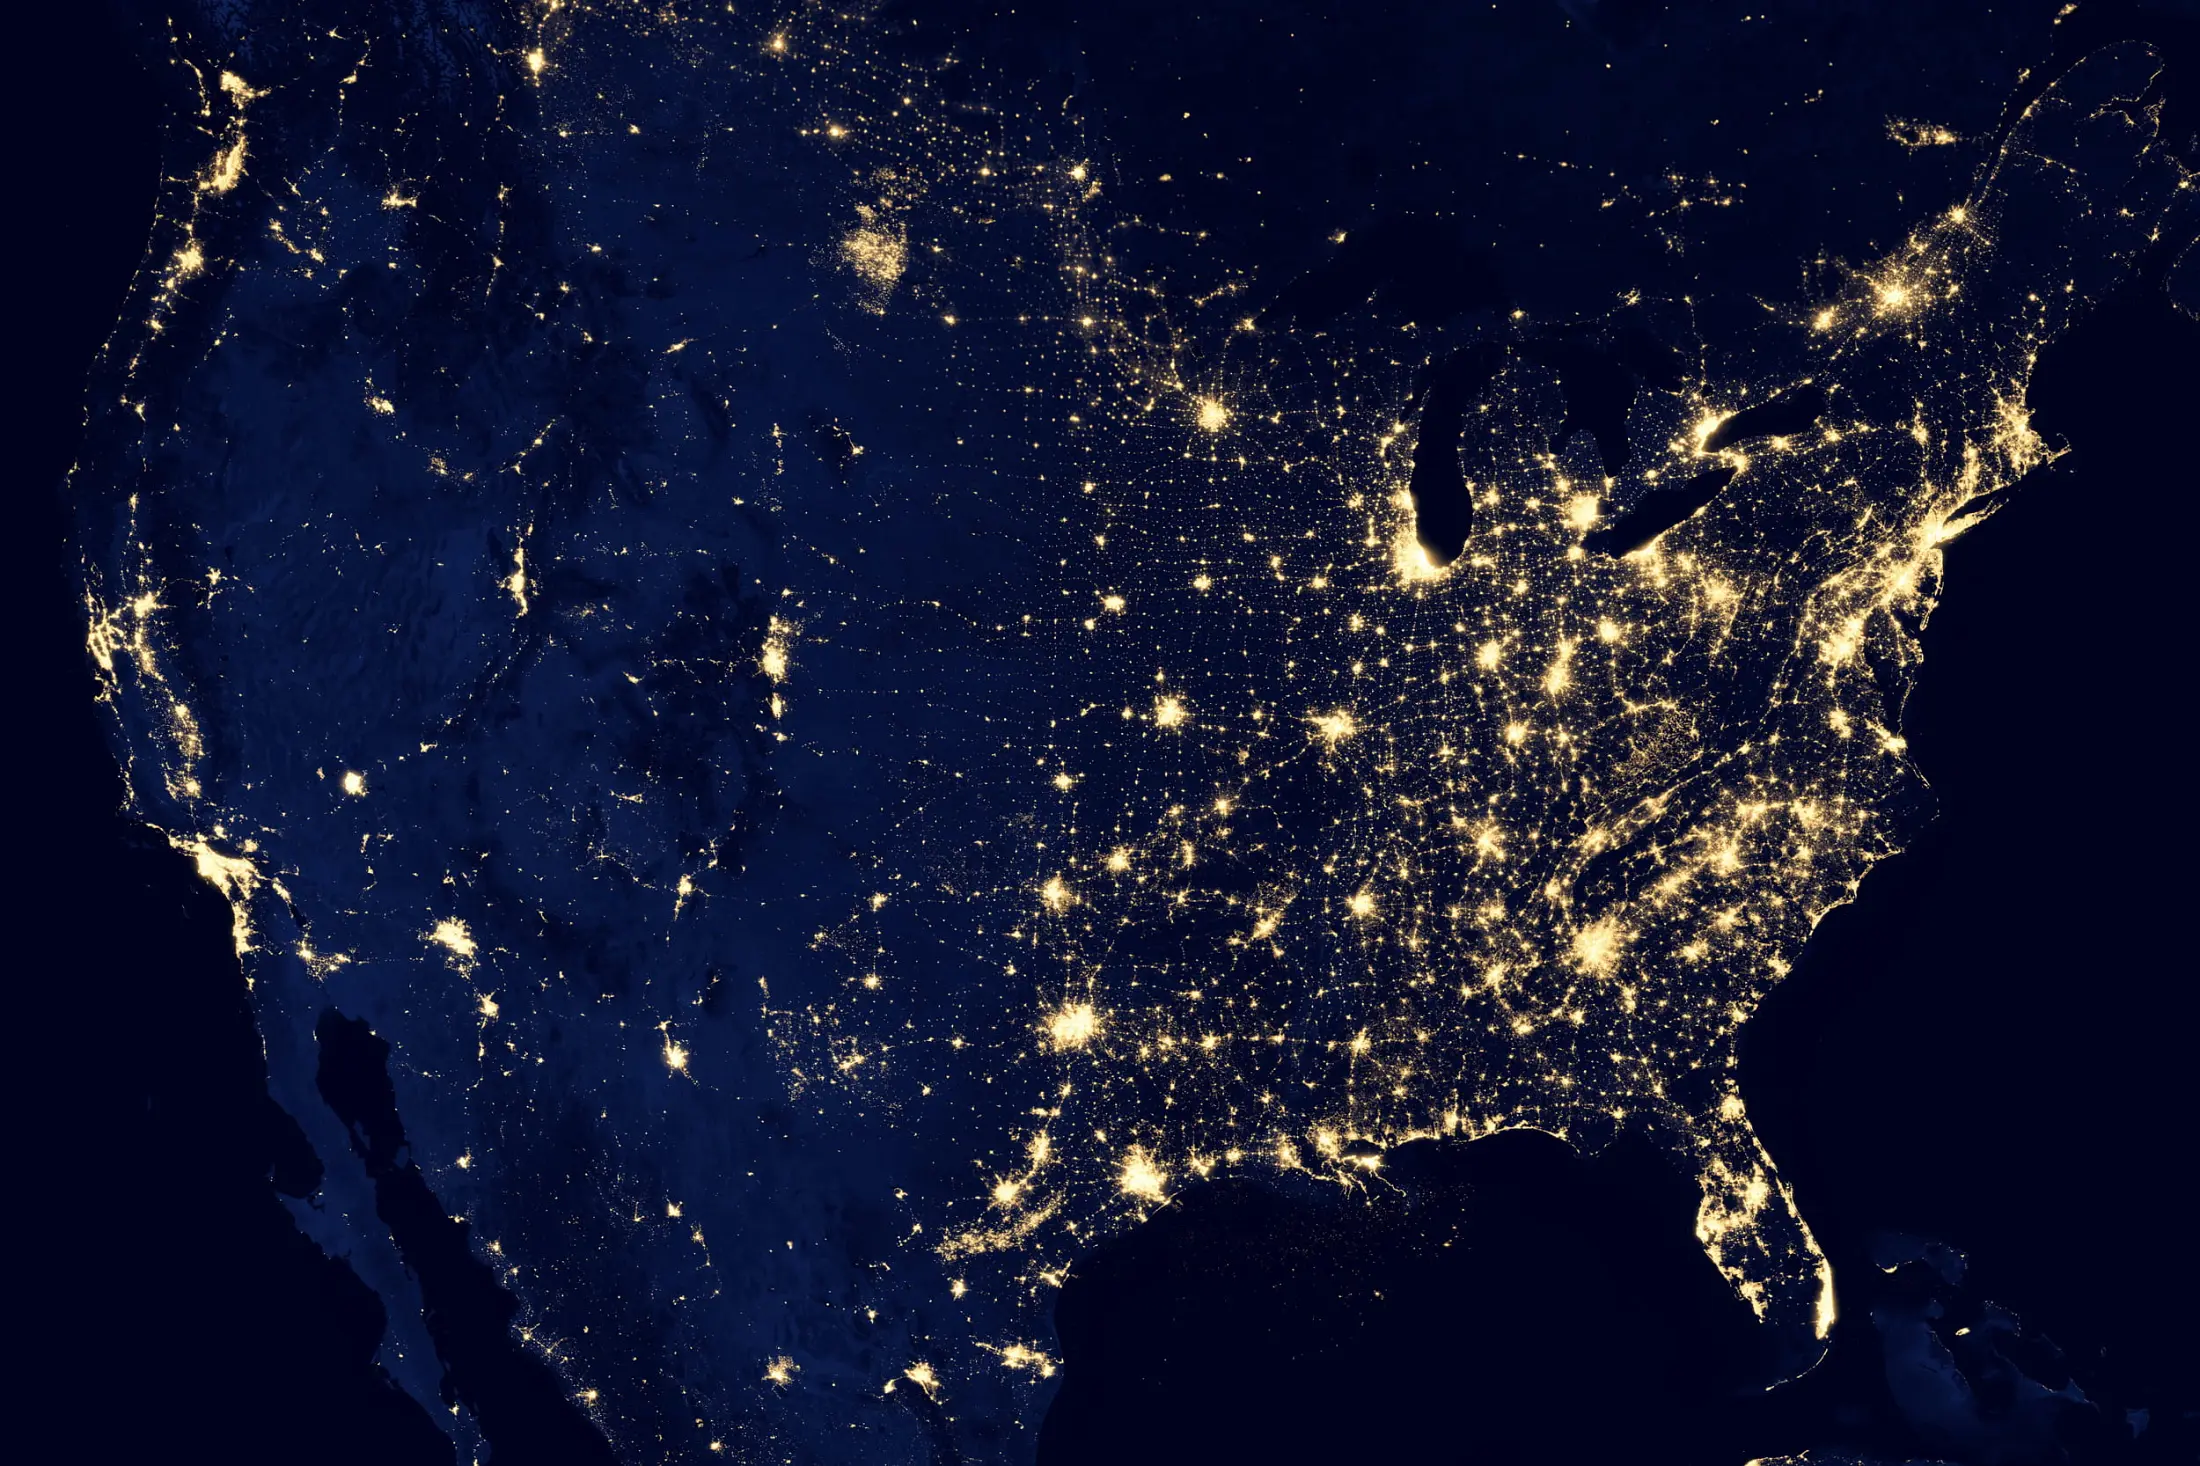 Night-Time Light Remote Sensing for Sustainable Development Goals